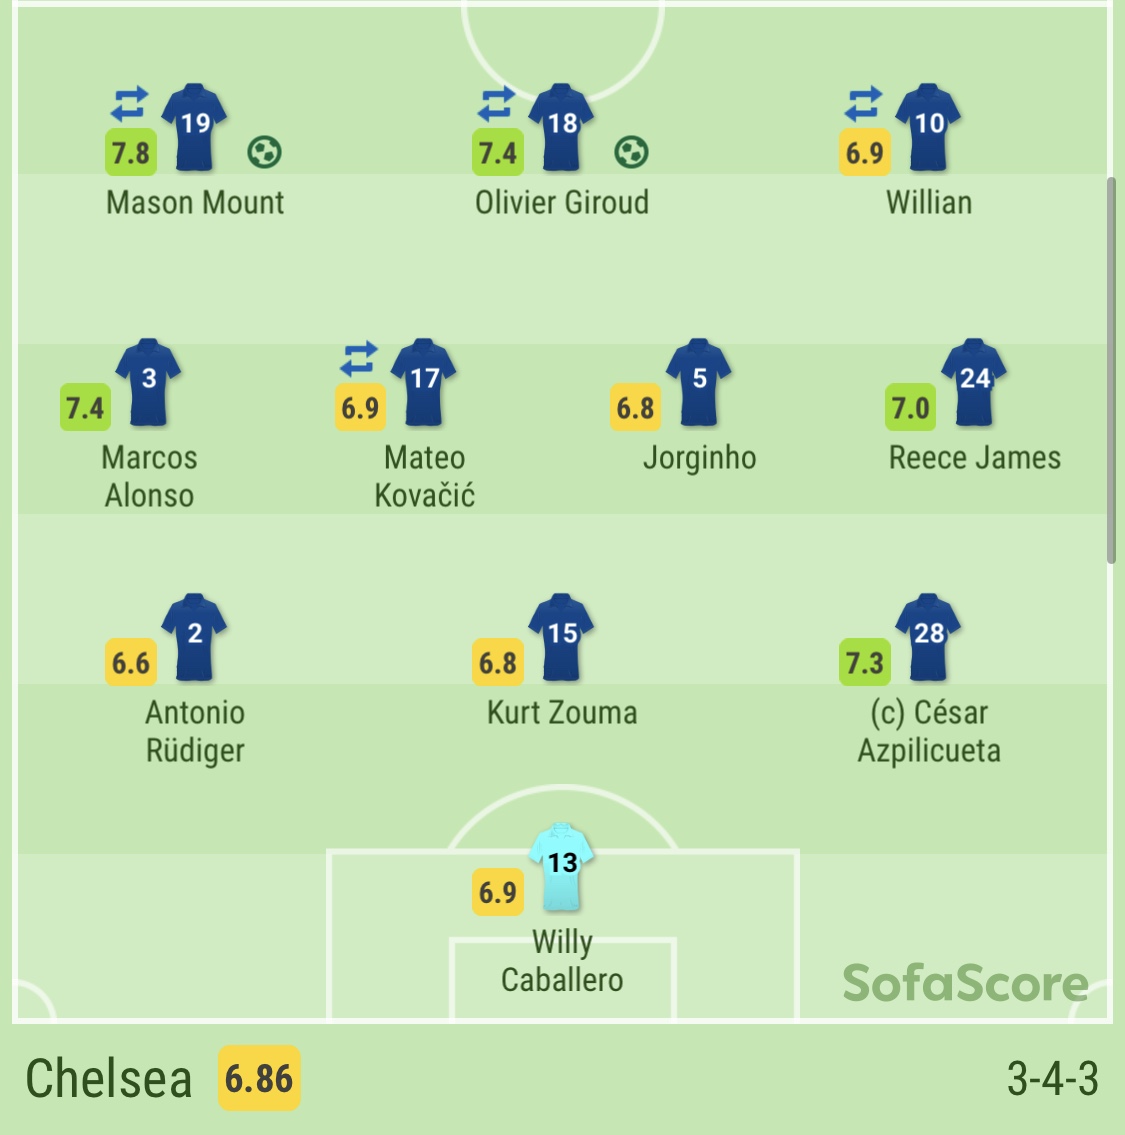 The Set-Up•After being alarmed by the 8 goals conceded in their last 3 away trips vs West Ham,Palace+Sheff Utd, Lampard reverted to 3-4-3 - a big game formula that had served him well in wins vs Spurs (x2) & ArsenalWith Kovačić in the midfield double pivot alongside Jorginho